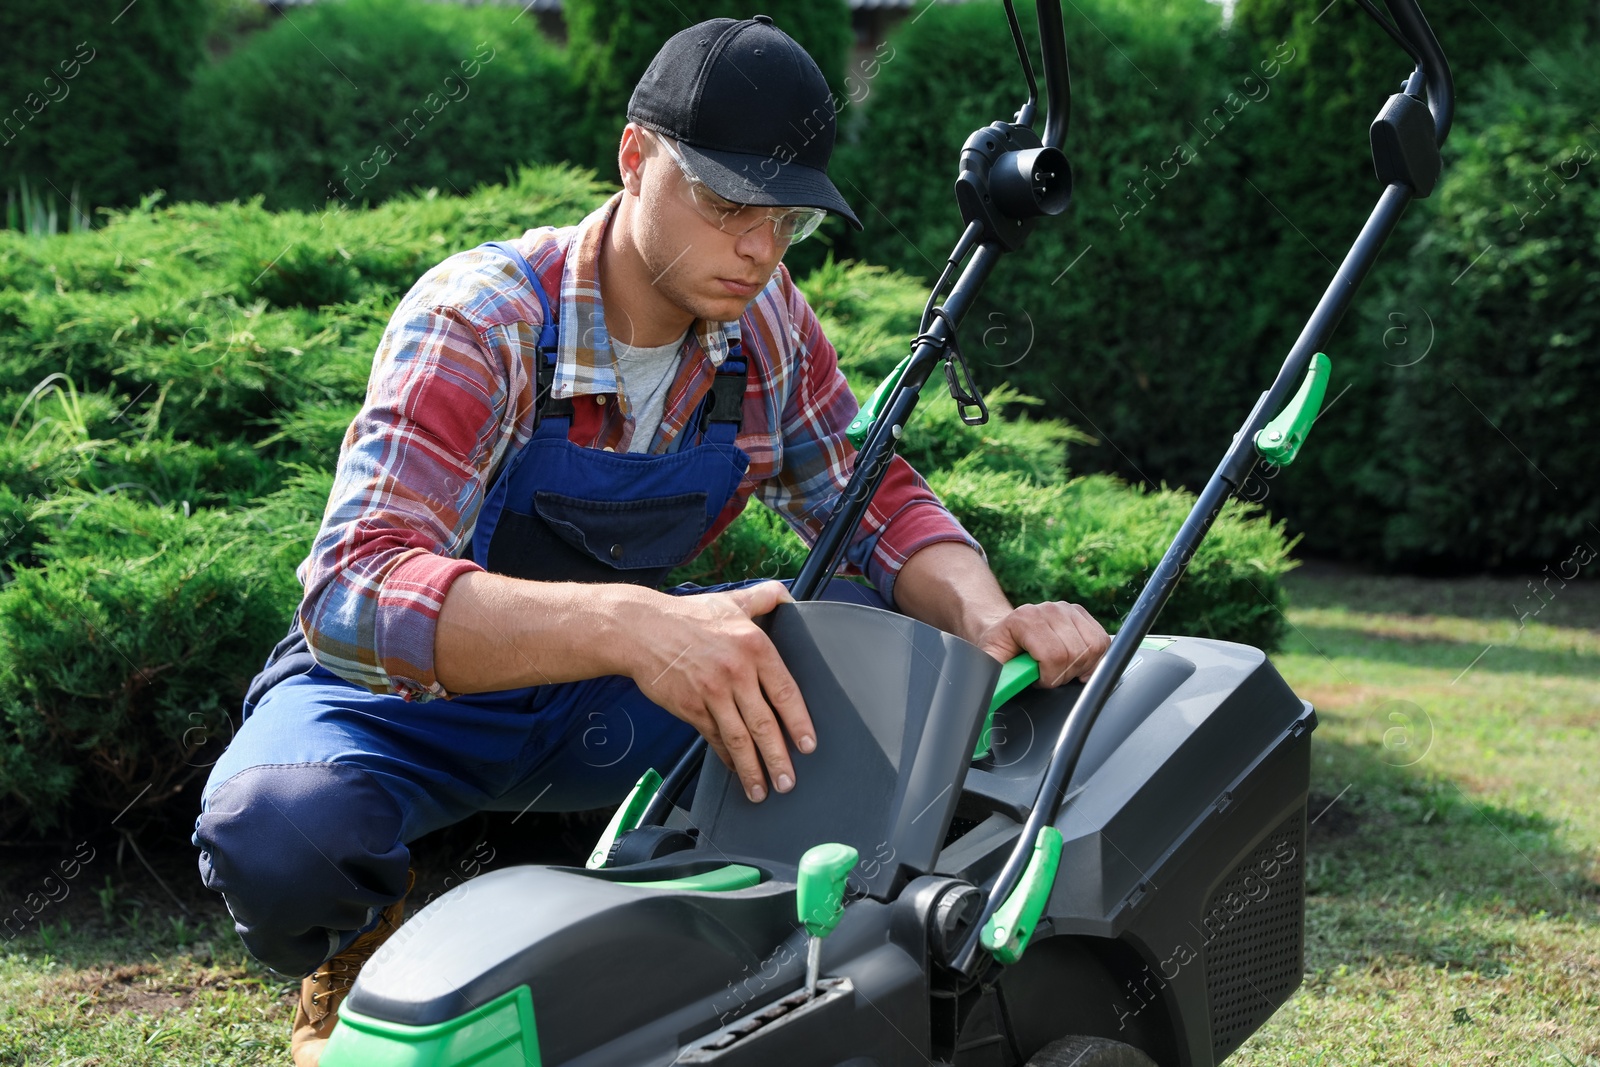 Photo of Cleaning lawn mower. Young man detaching grass catcher from device in garden